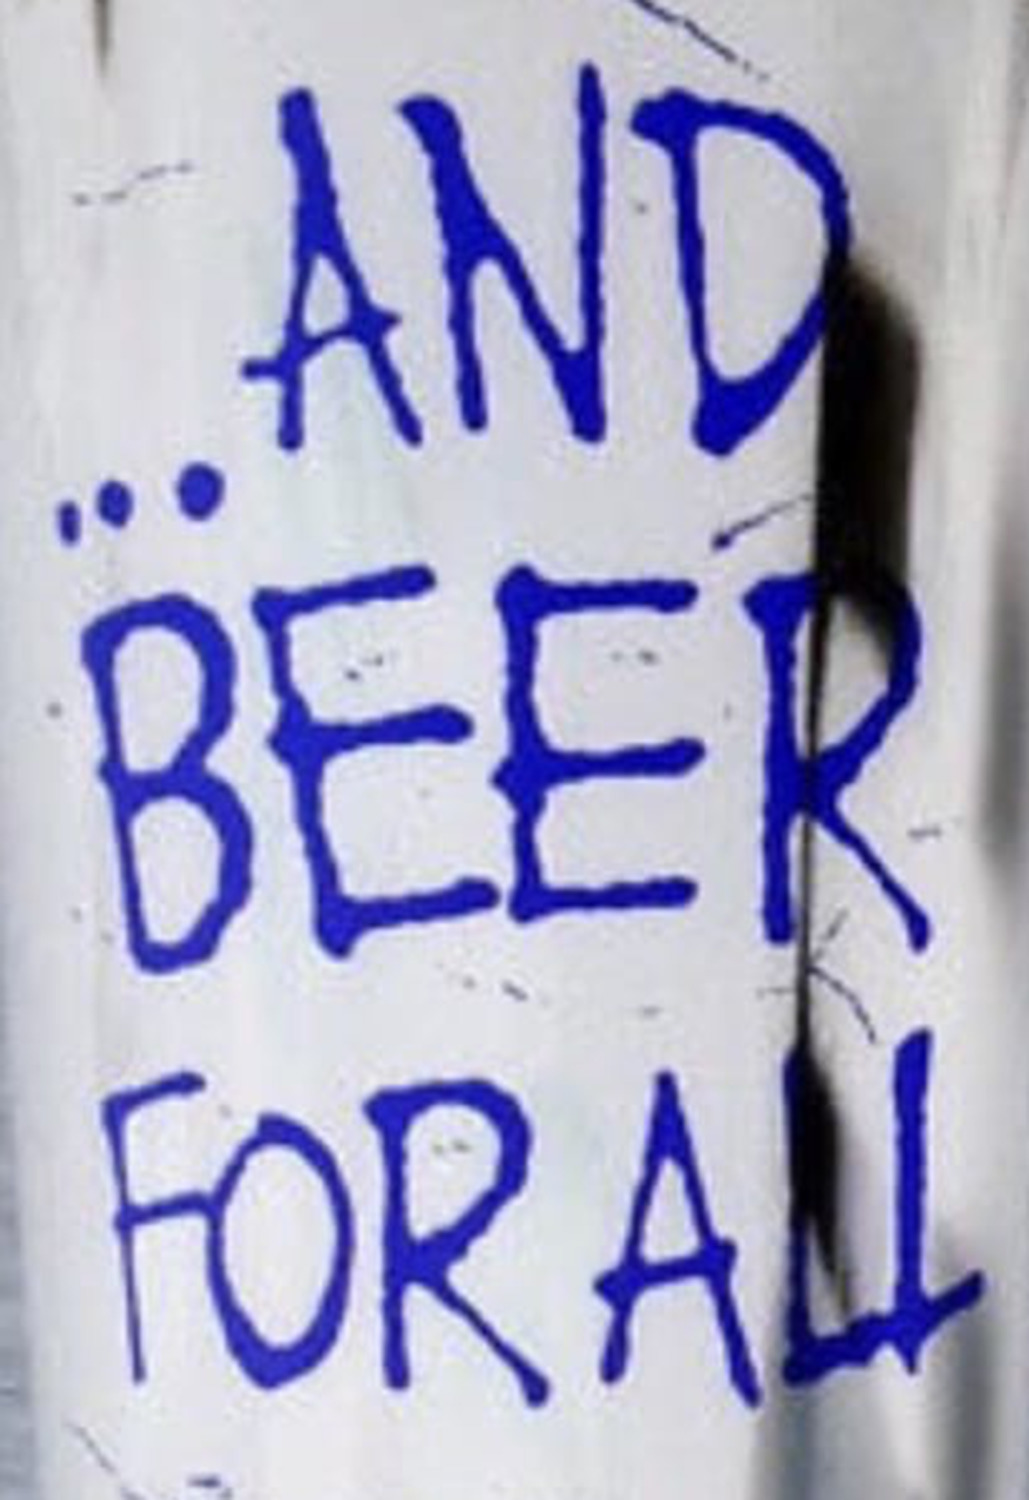 BEER FOR ALL